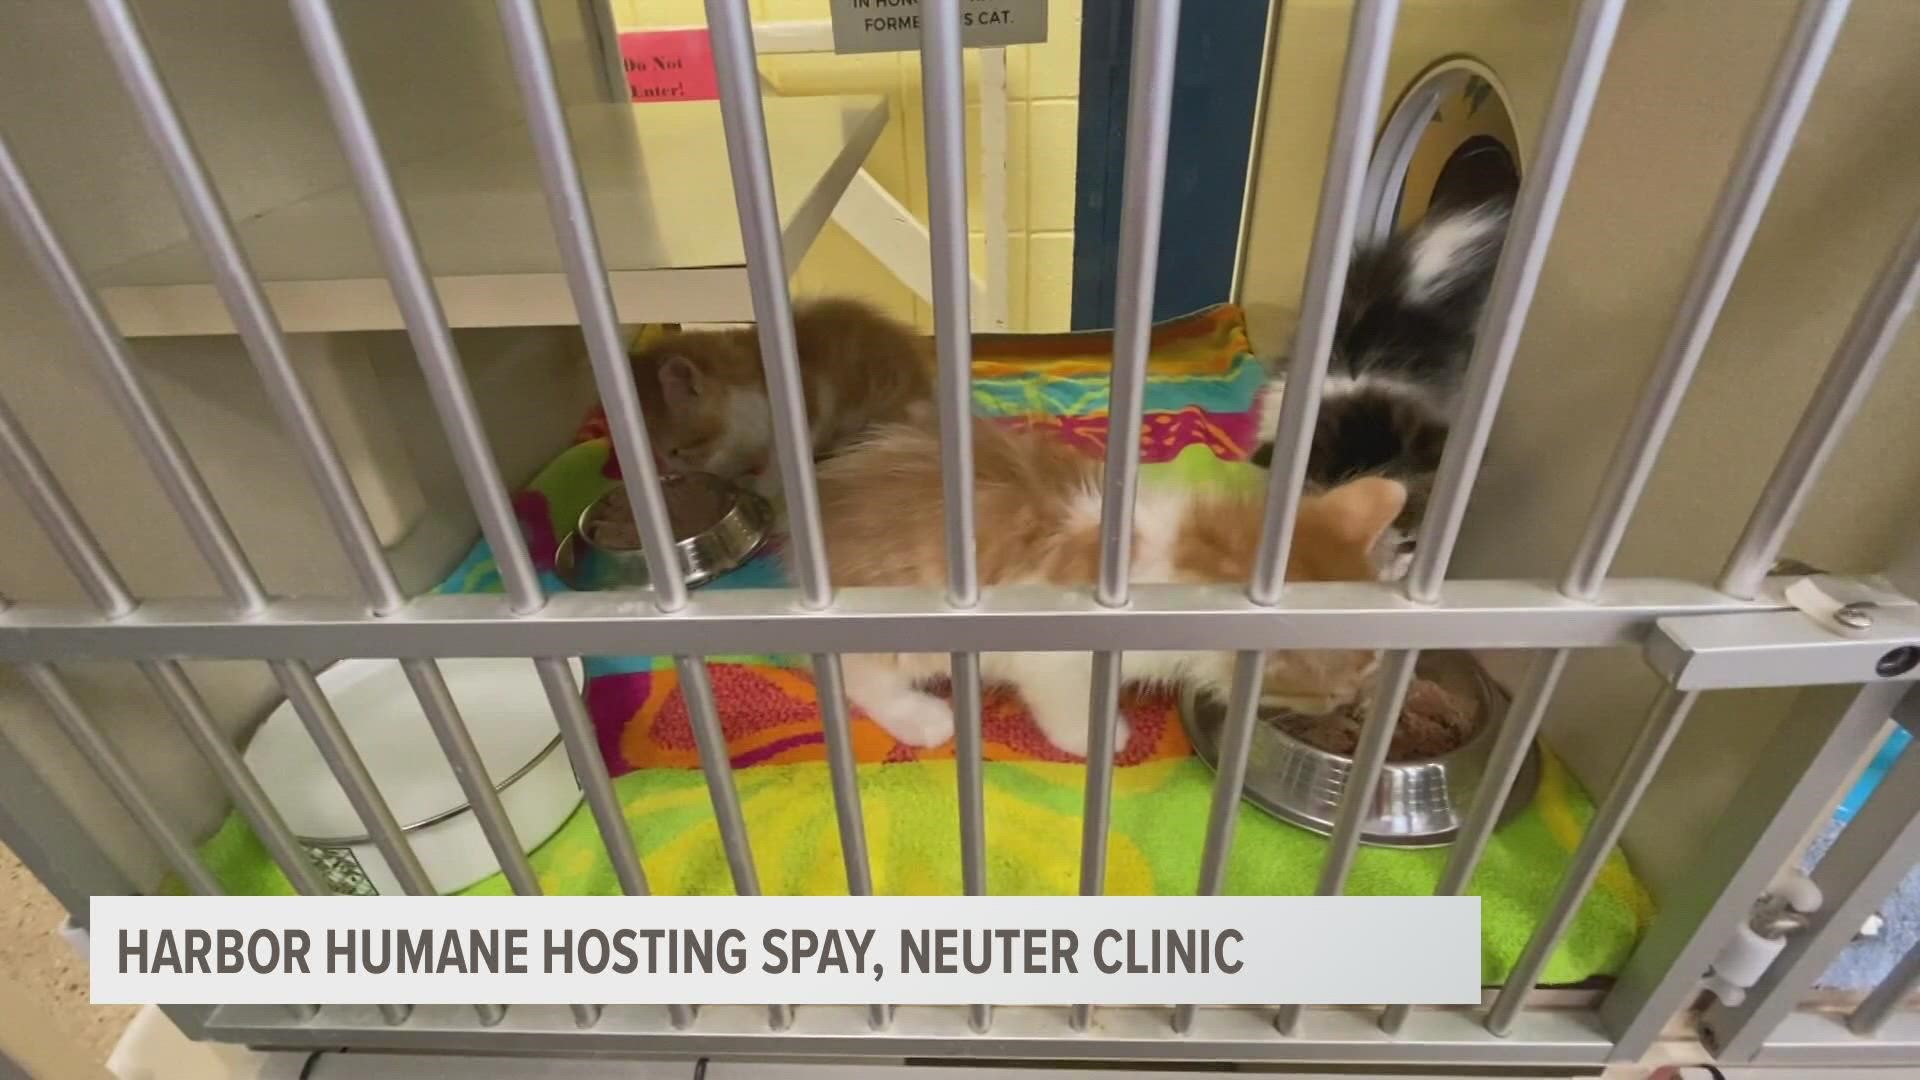 The Harbor Humane Society is hosting a free spay and neuter clinic for their feline friends, which includes a free microchip, on Saturday, April 30.